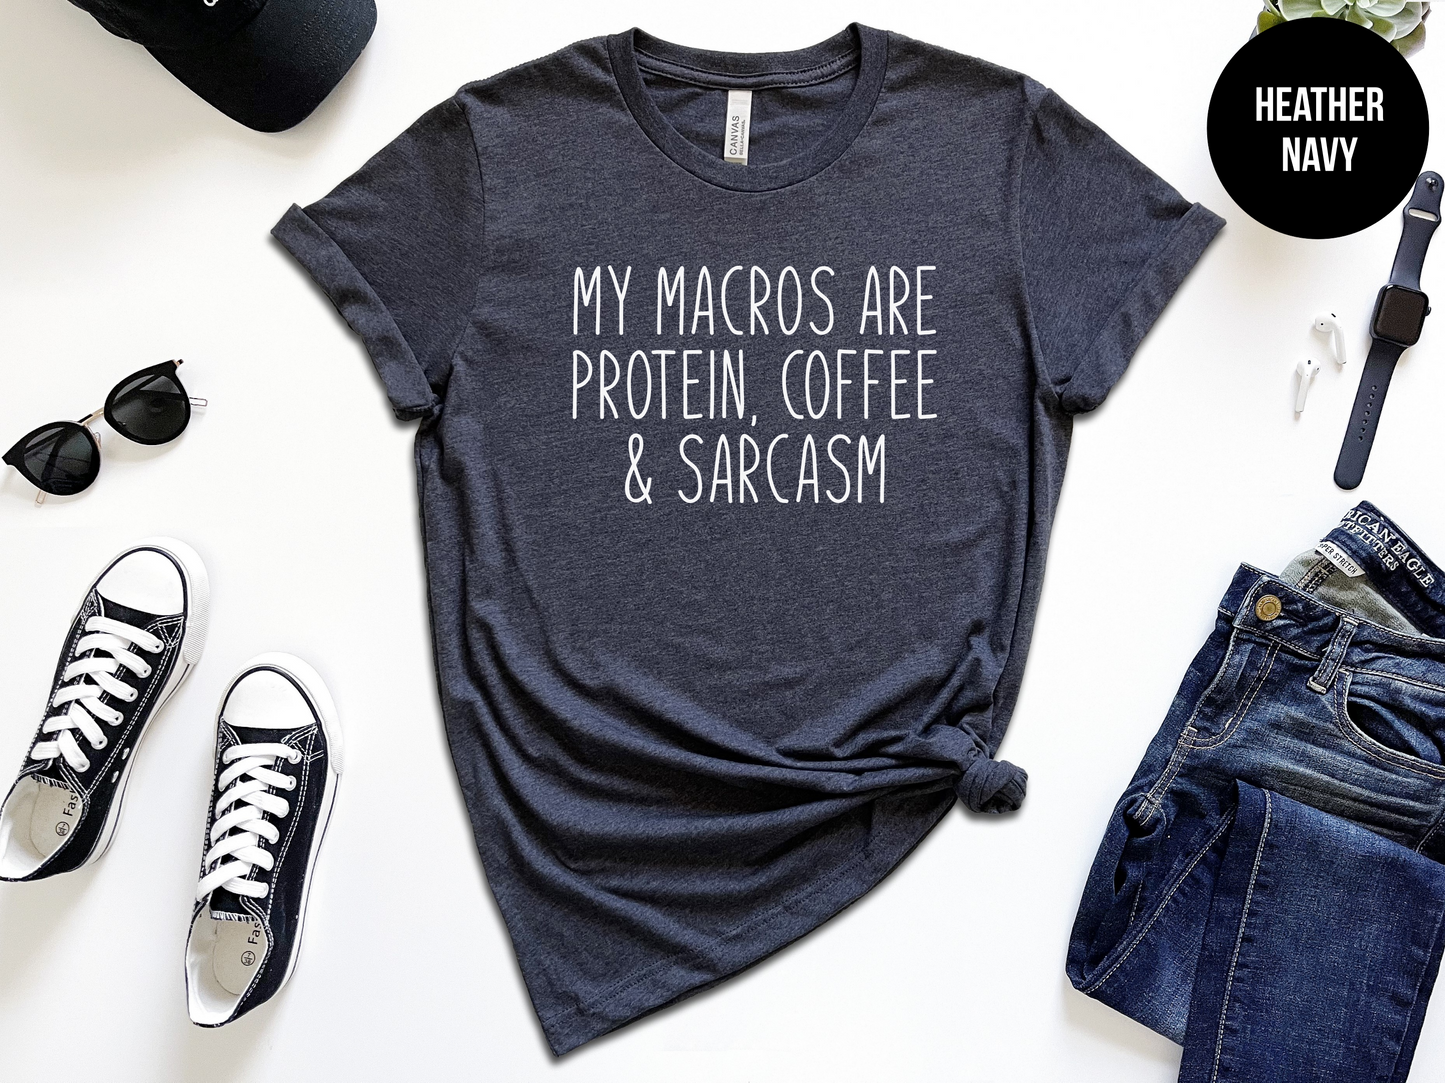 My Macros Are Protein, Coffee and Sarcasm